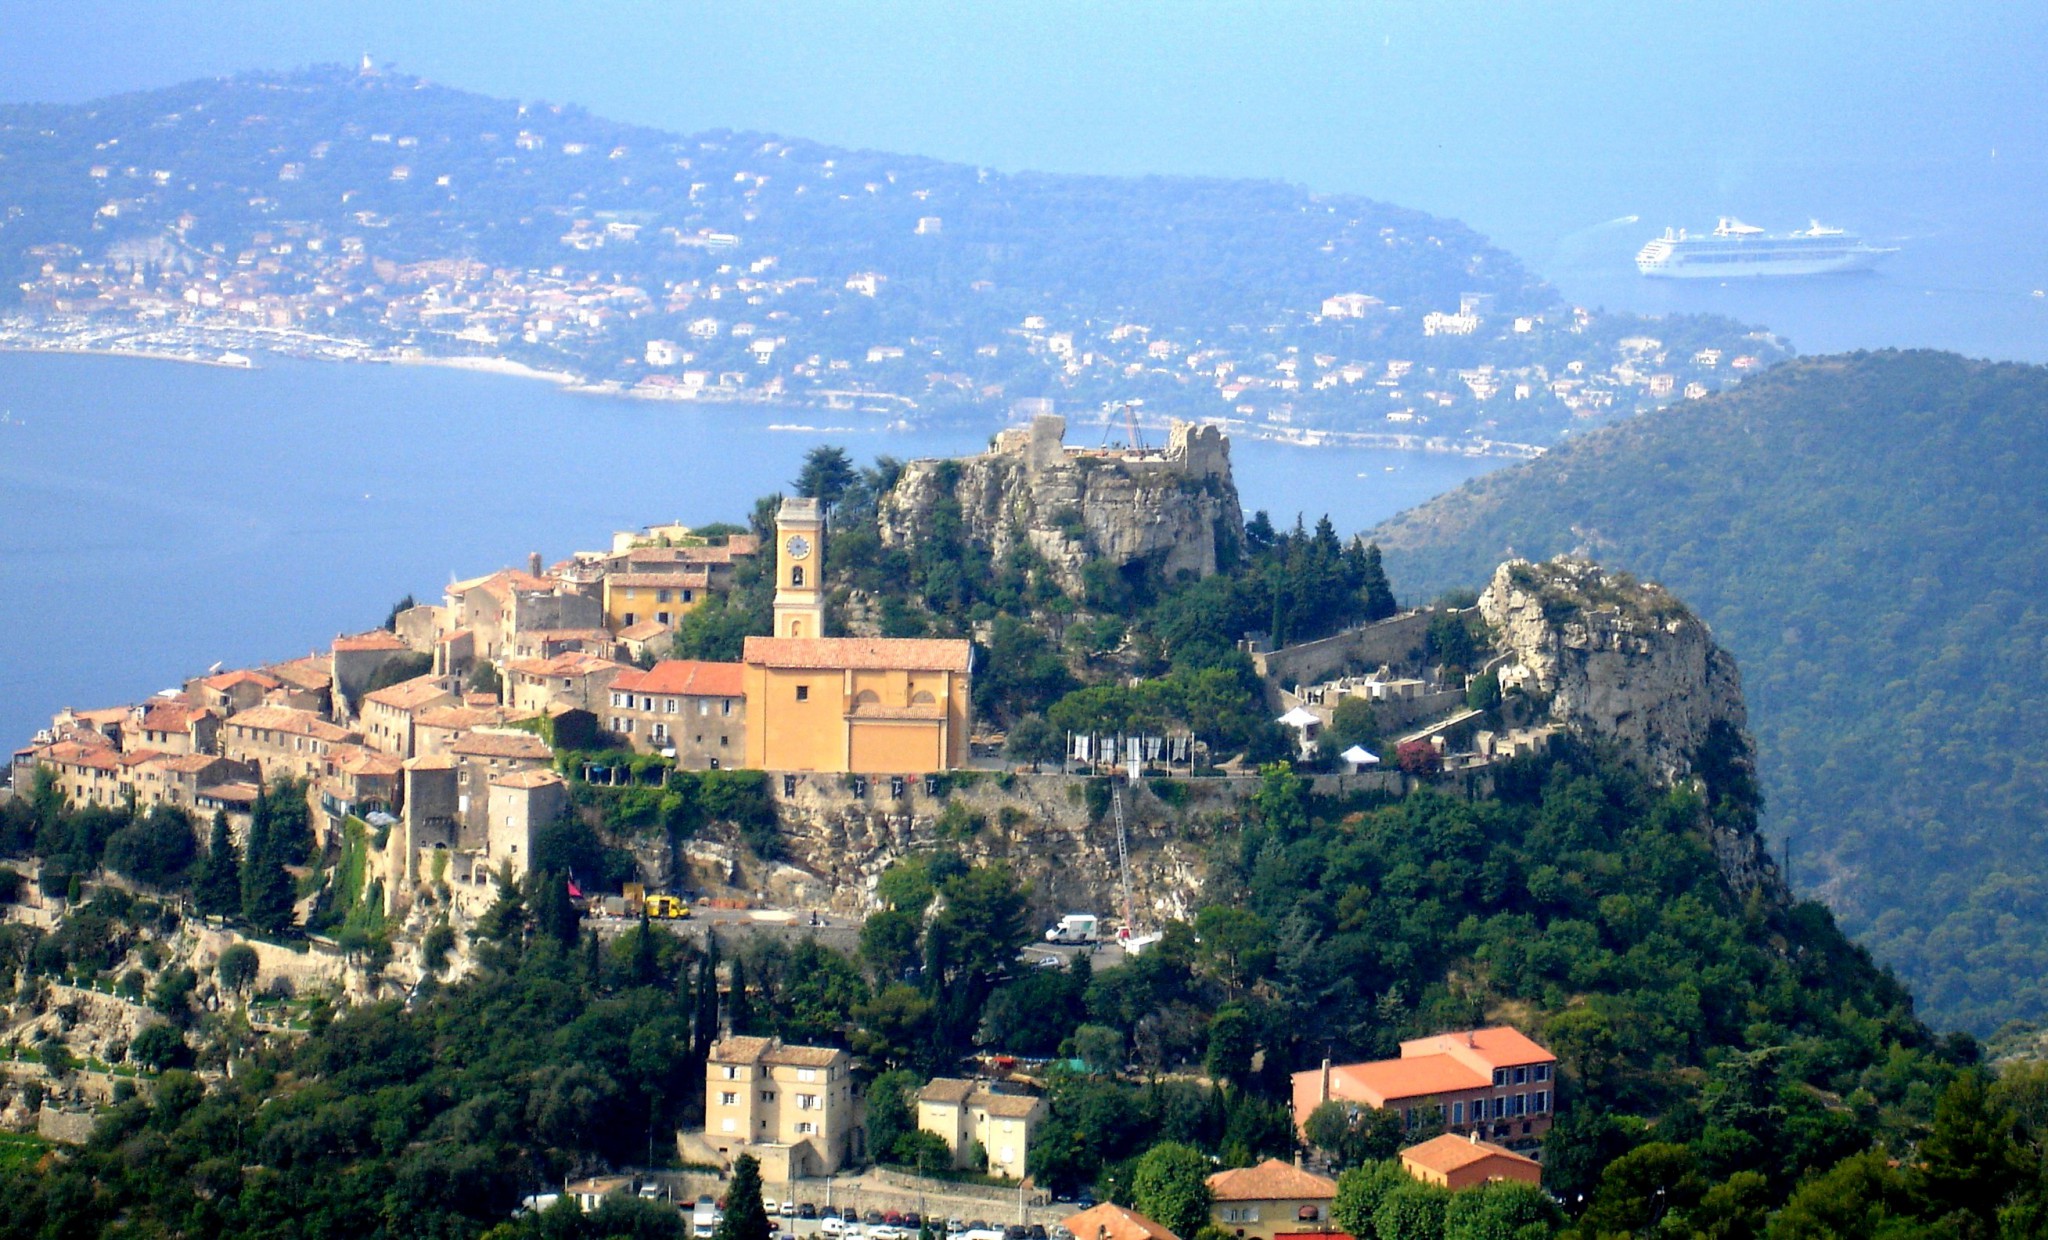 French Riviera - Travel to France - Eze by Jimi Magic (Public Domain)